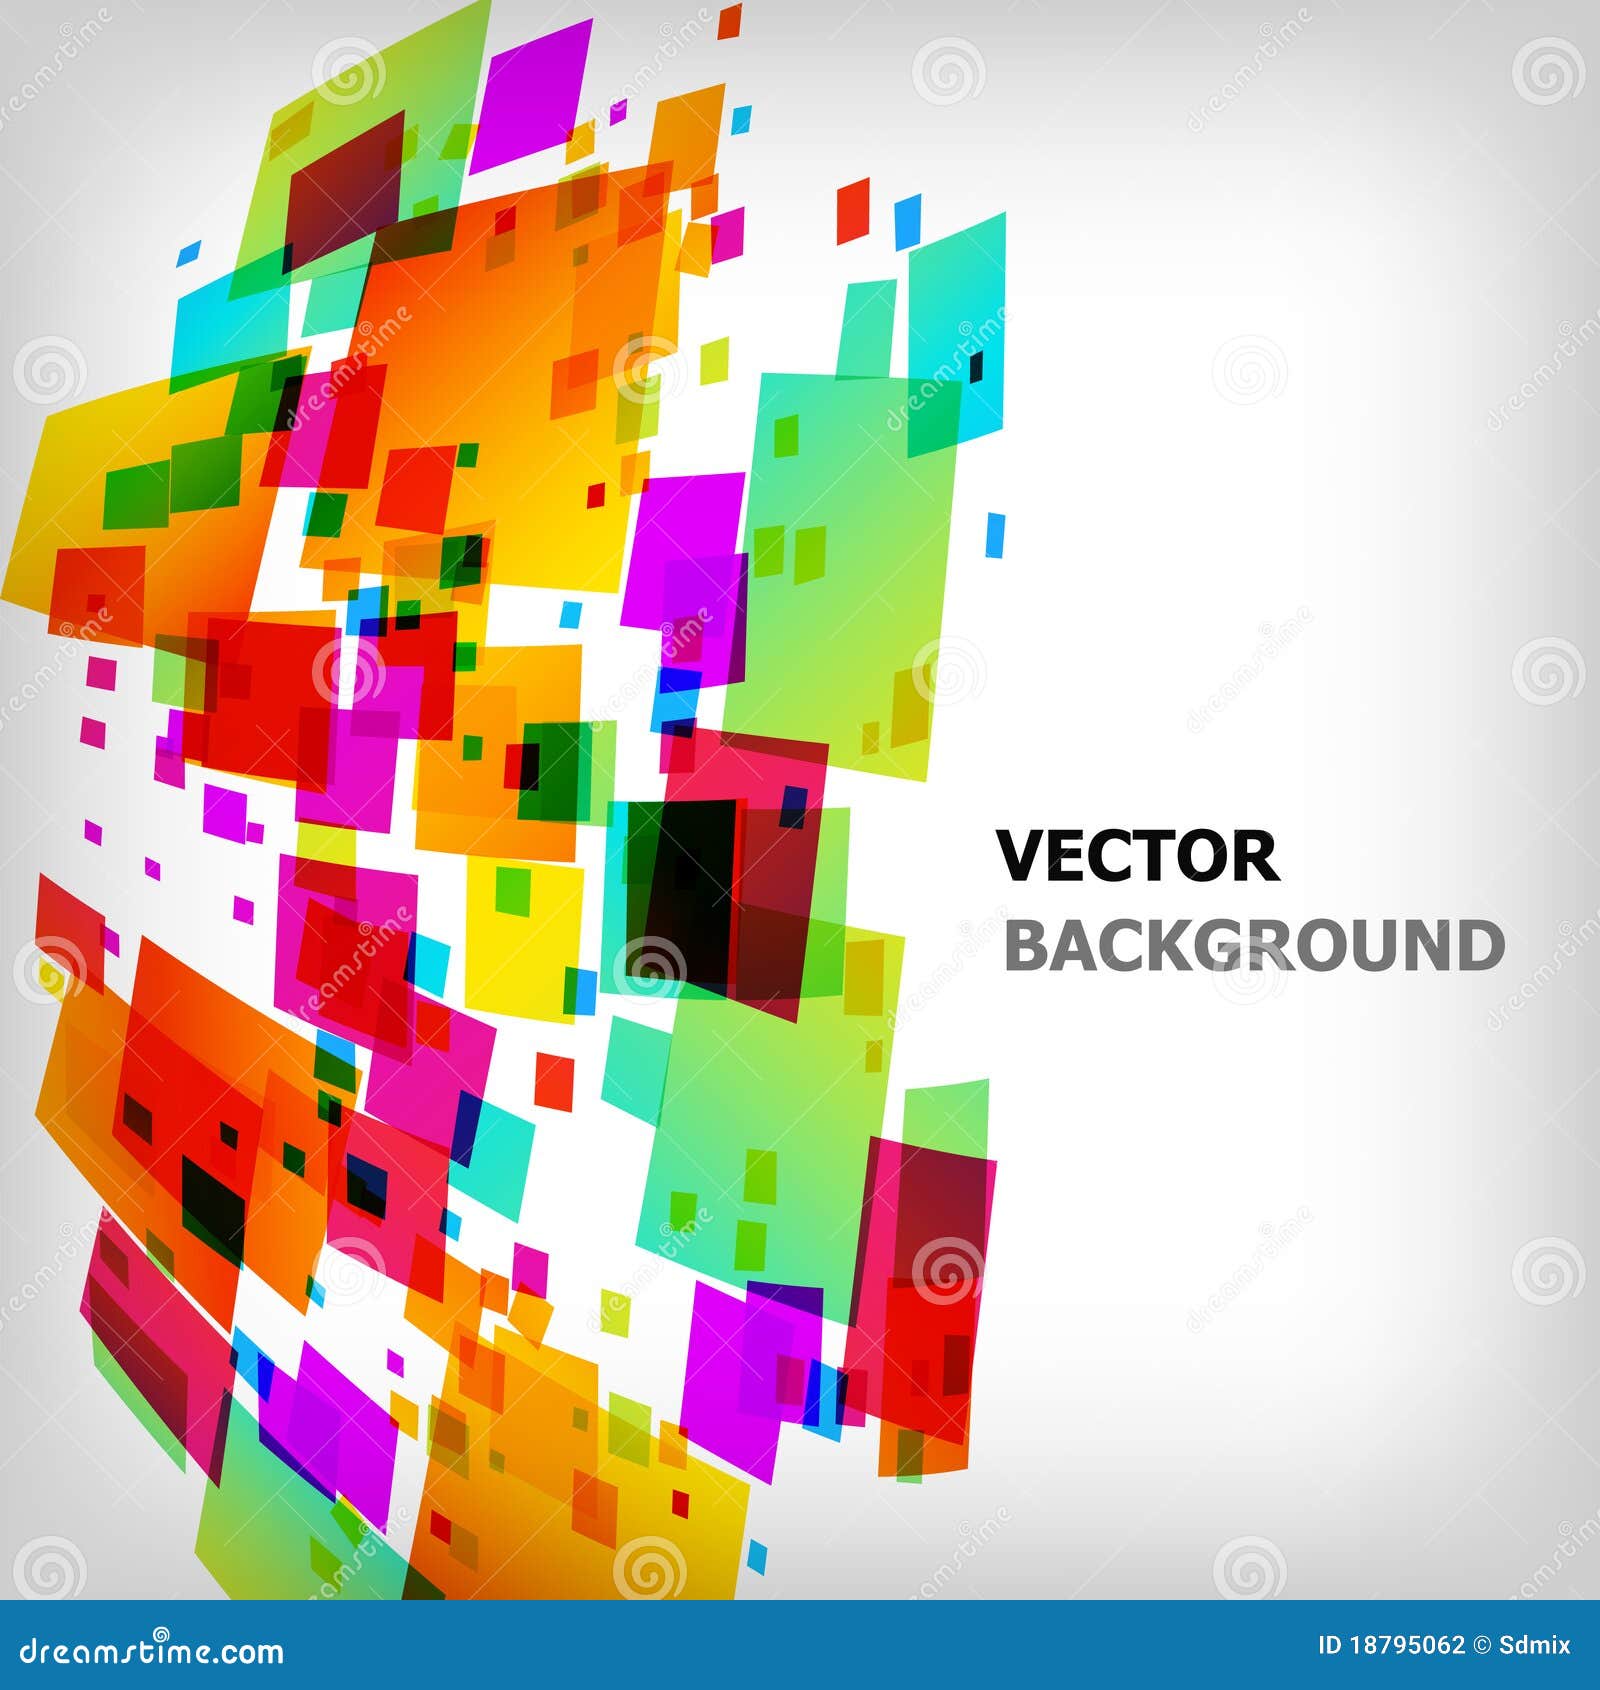 The abstract square colorful background - illustration